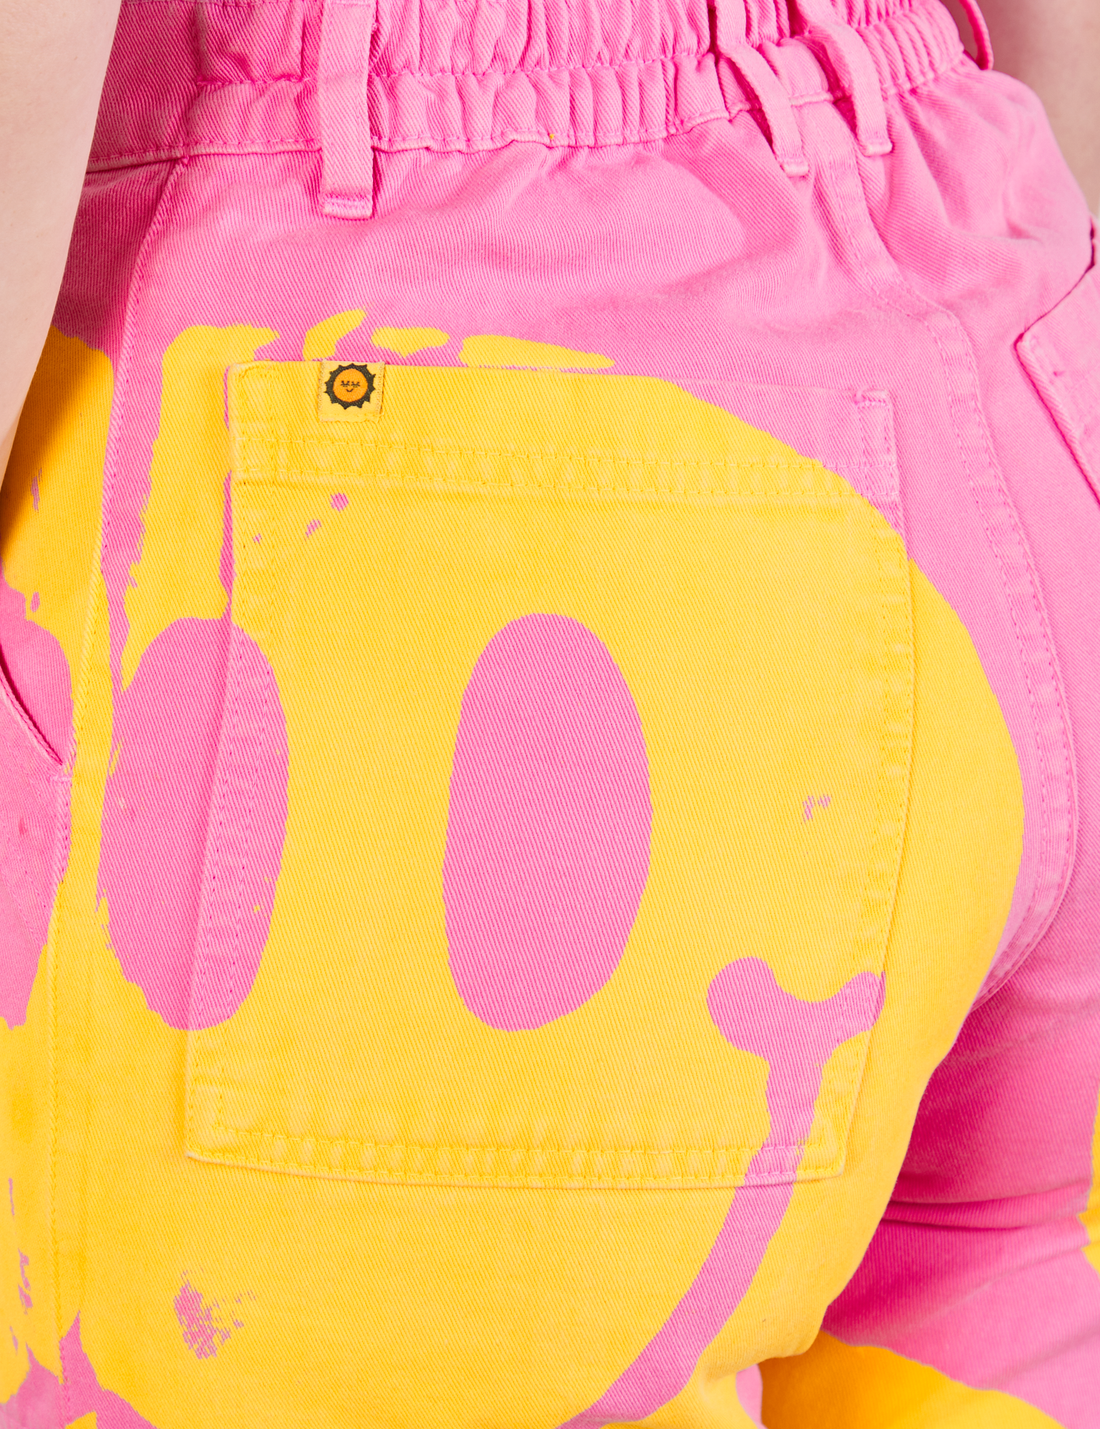 Back pocket close up of Icon Work Pants in Smilies worn by Alex. Bright Yellow paintstamped smiley face on a bubblegum pink background